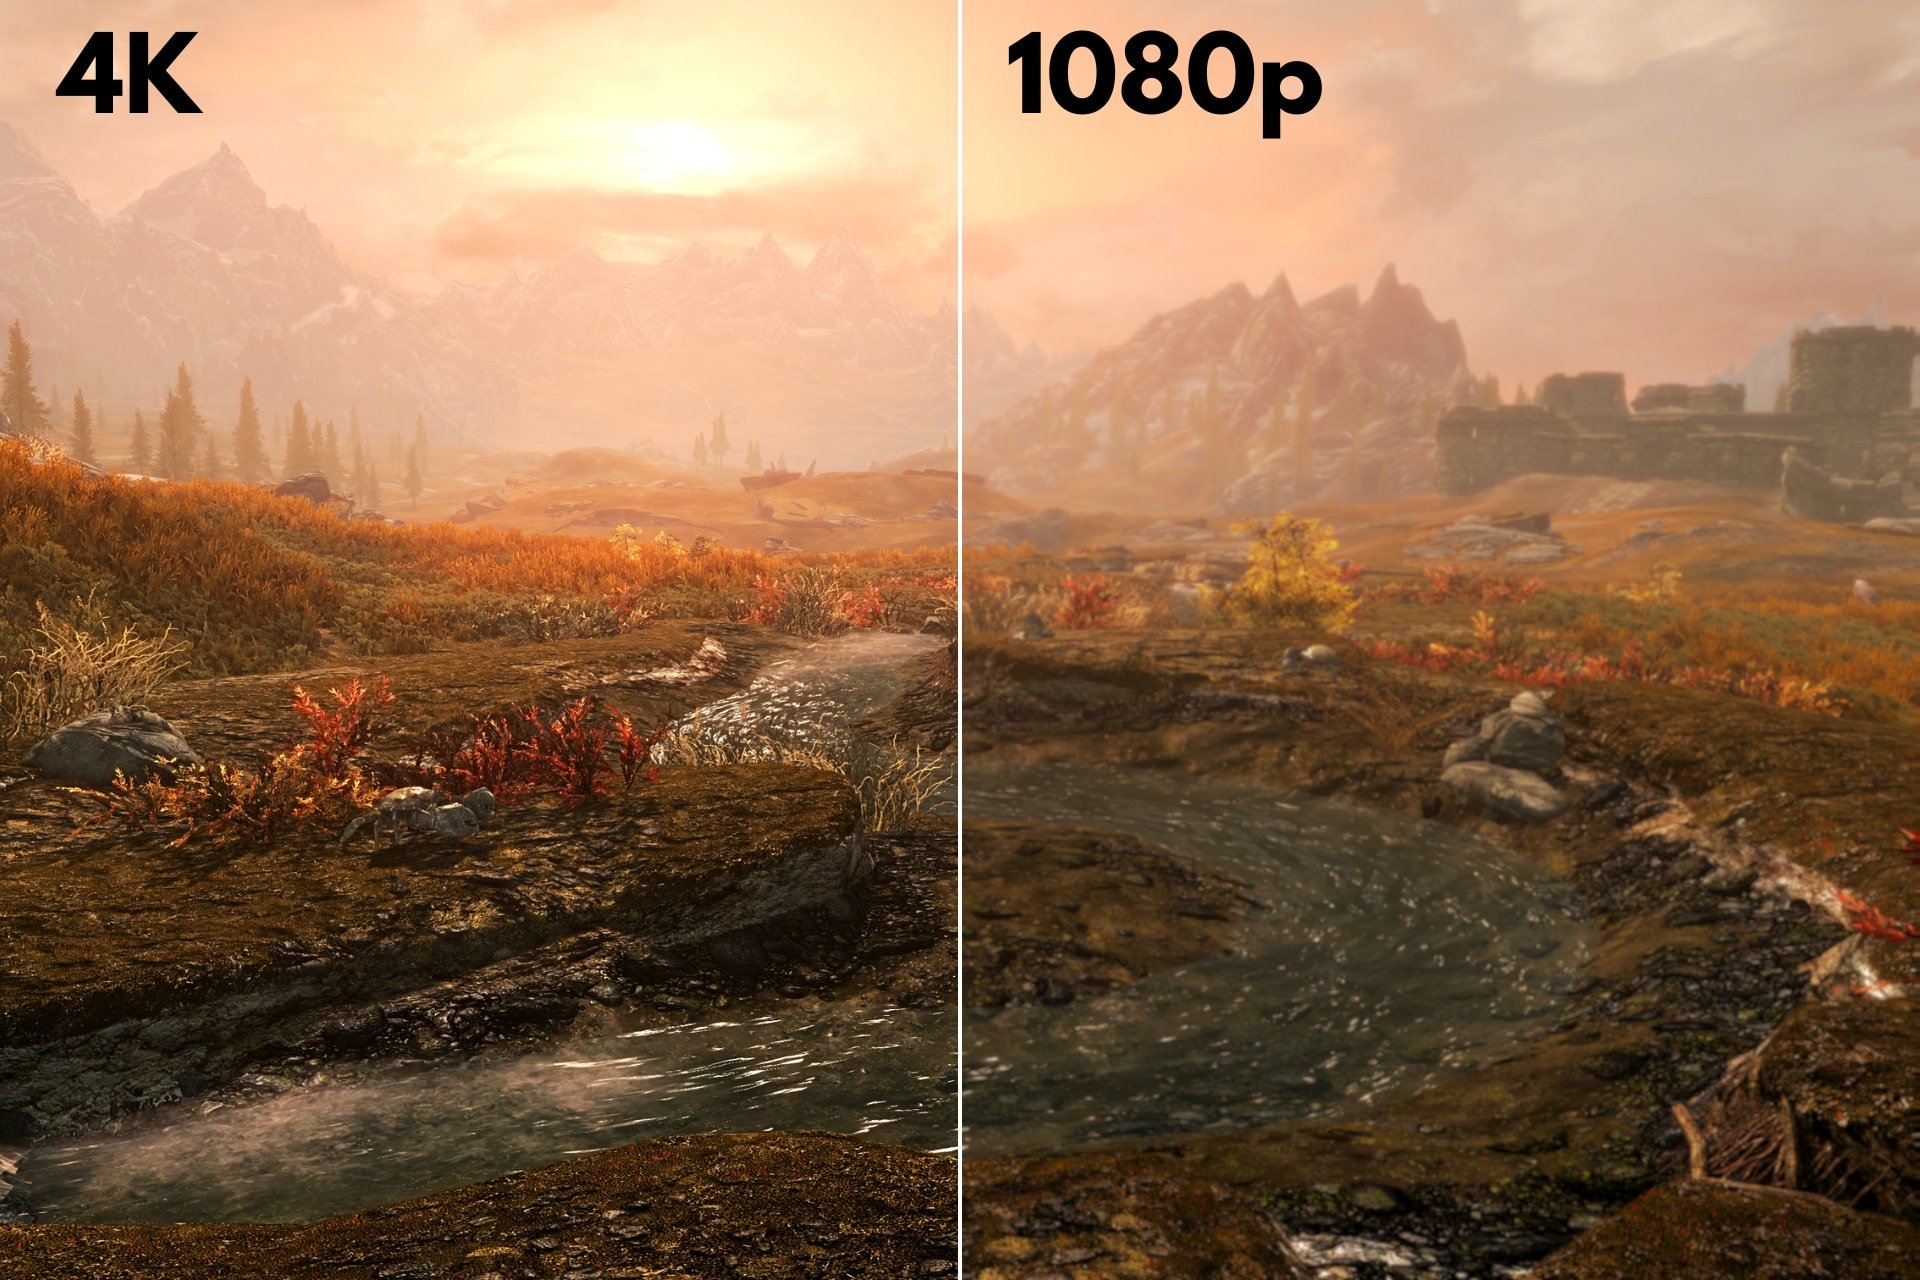 4K and 1080p as seen in Skyrim